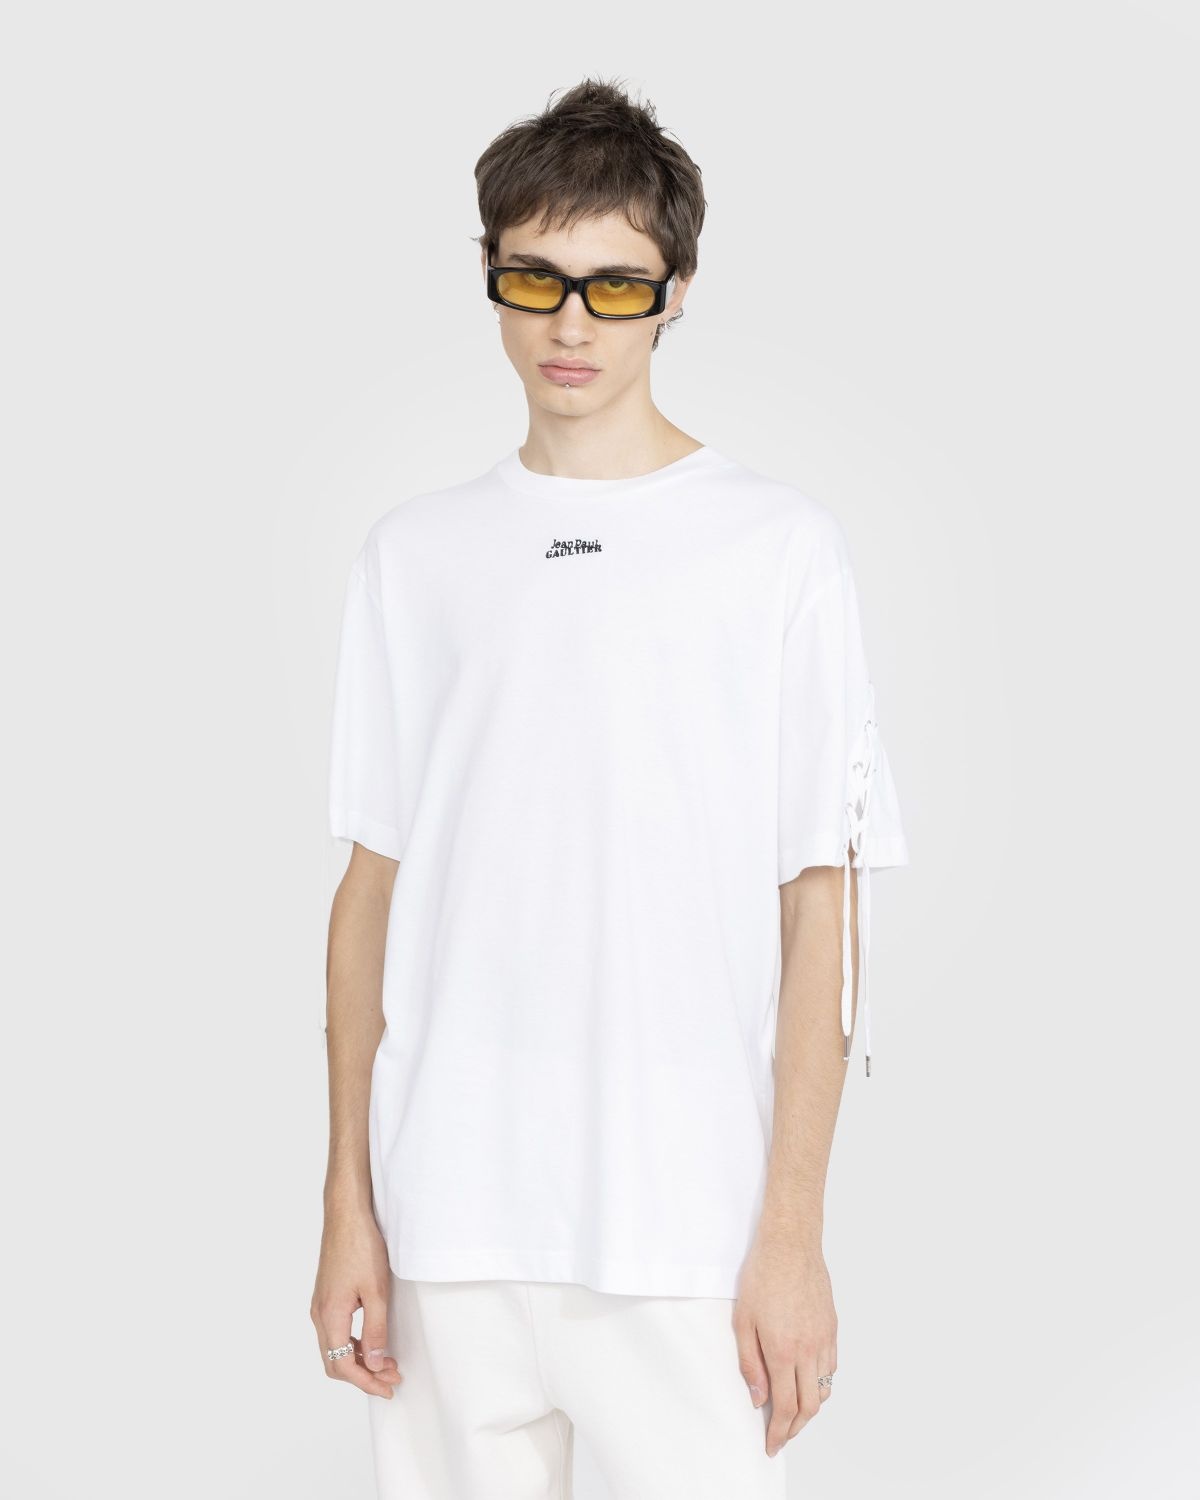 Jean Paul Gaultier – Oversize Laced Tee-Shirt White - 2